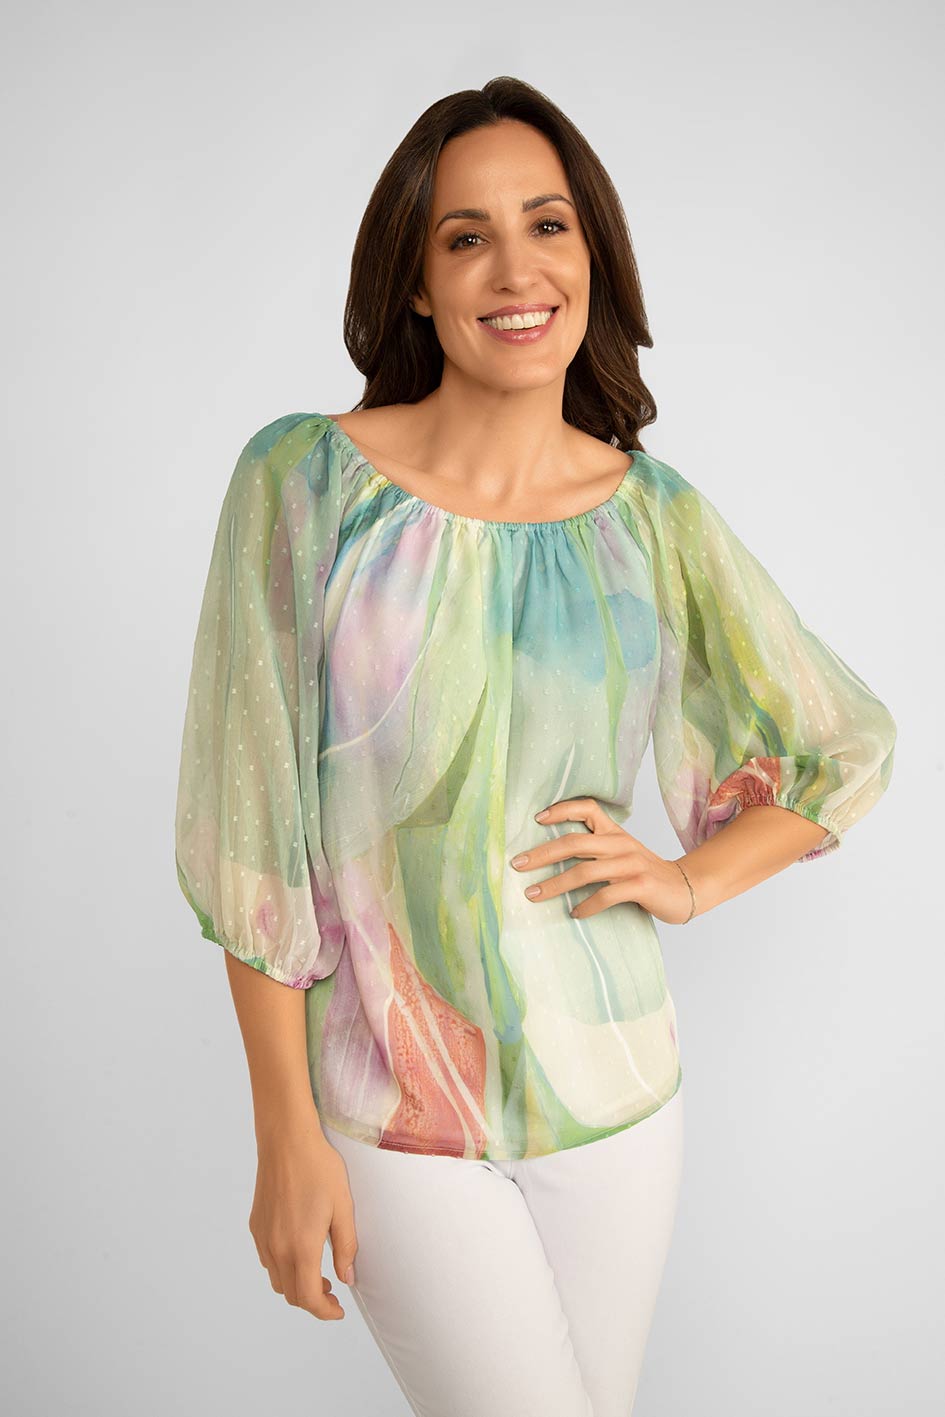 Claire Desjardins (91438) Women's 3/4 Puff Sleeve Pastel Green Off Shoulder Blouse Made in Textured Chiffon